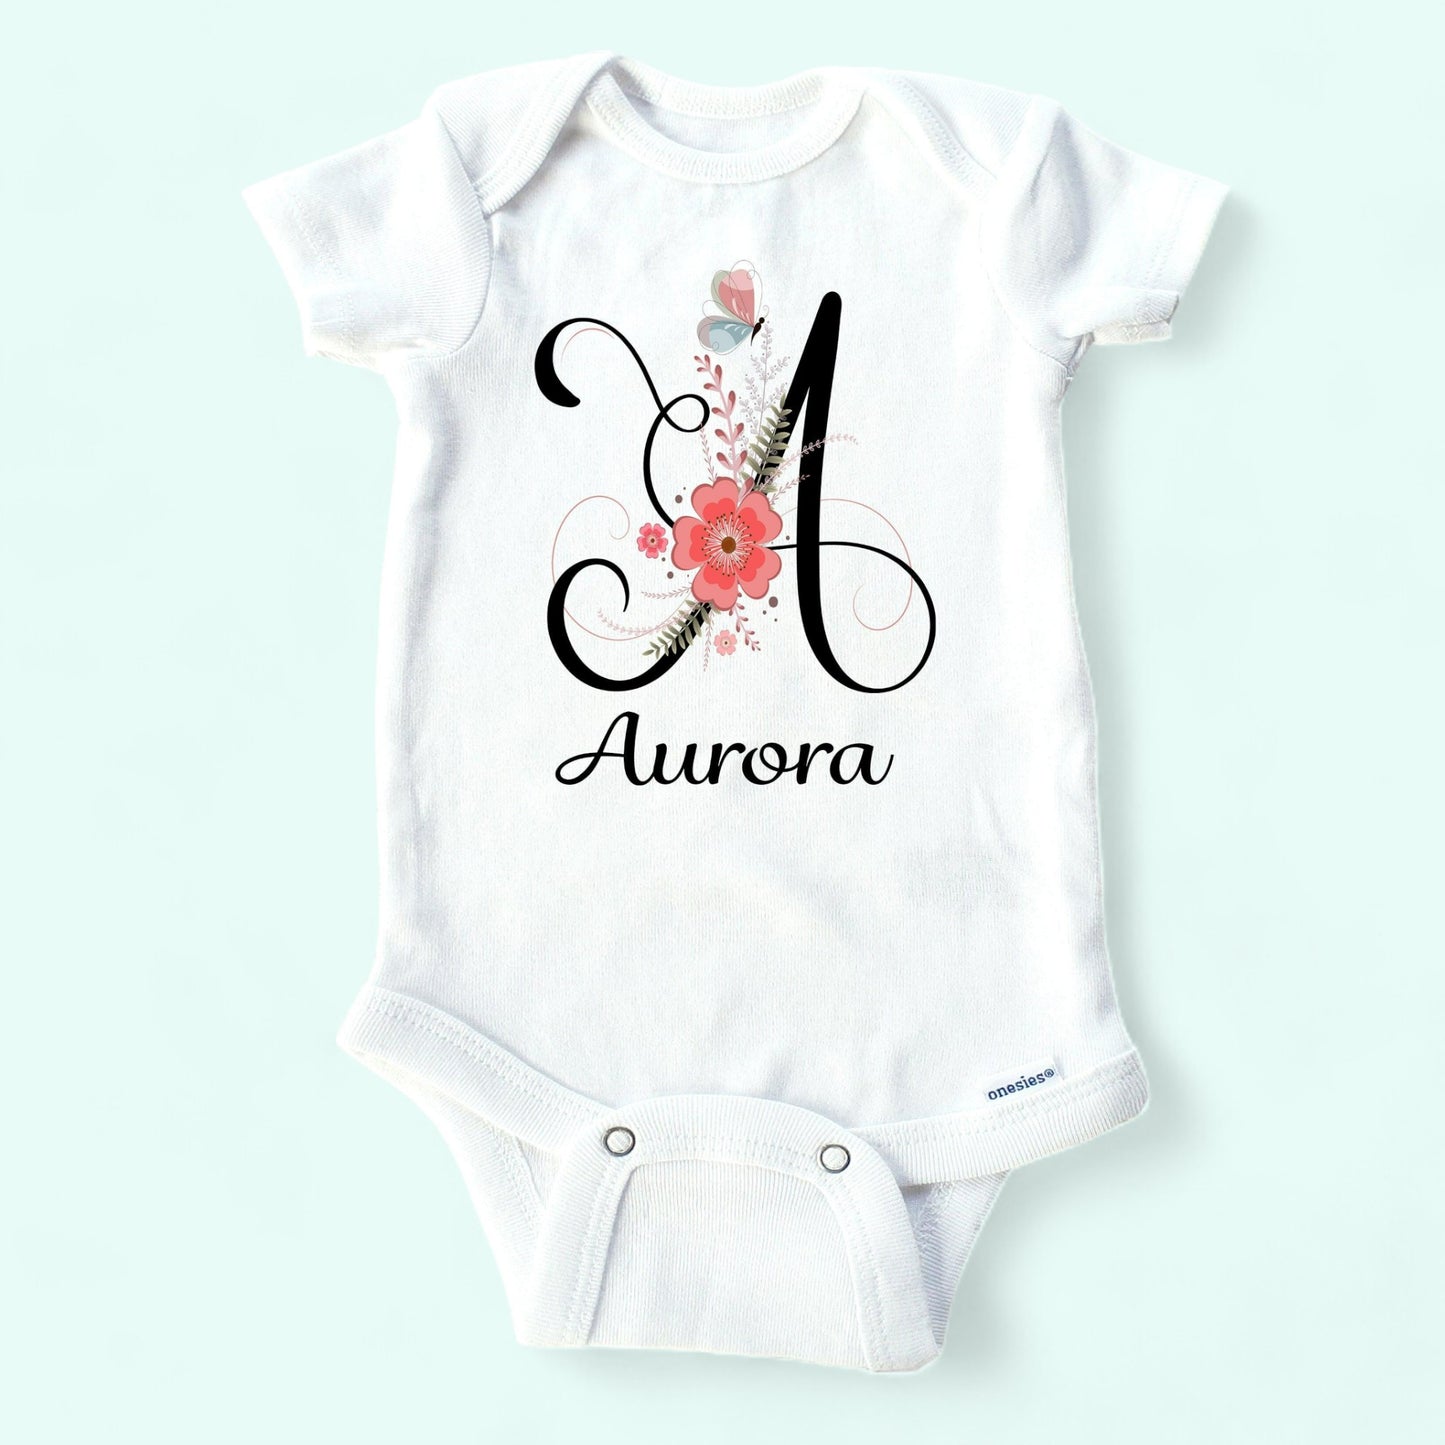 Girls personalized onesie short sleeve letter A